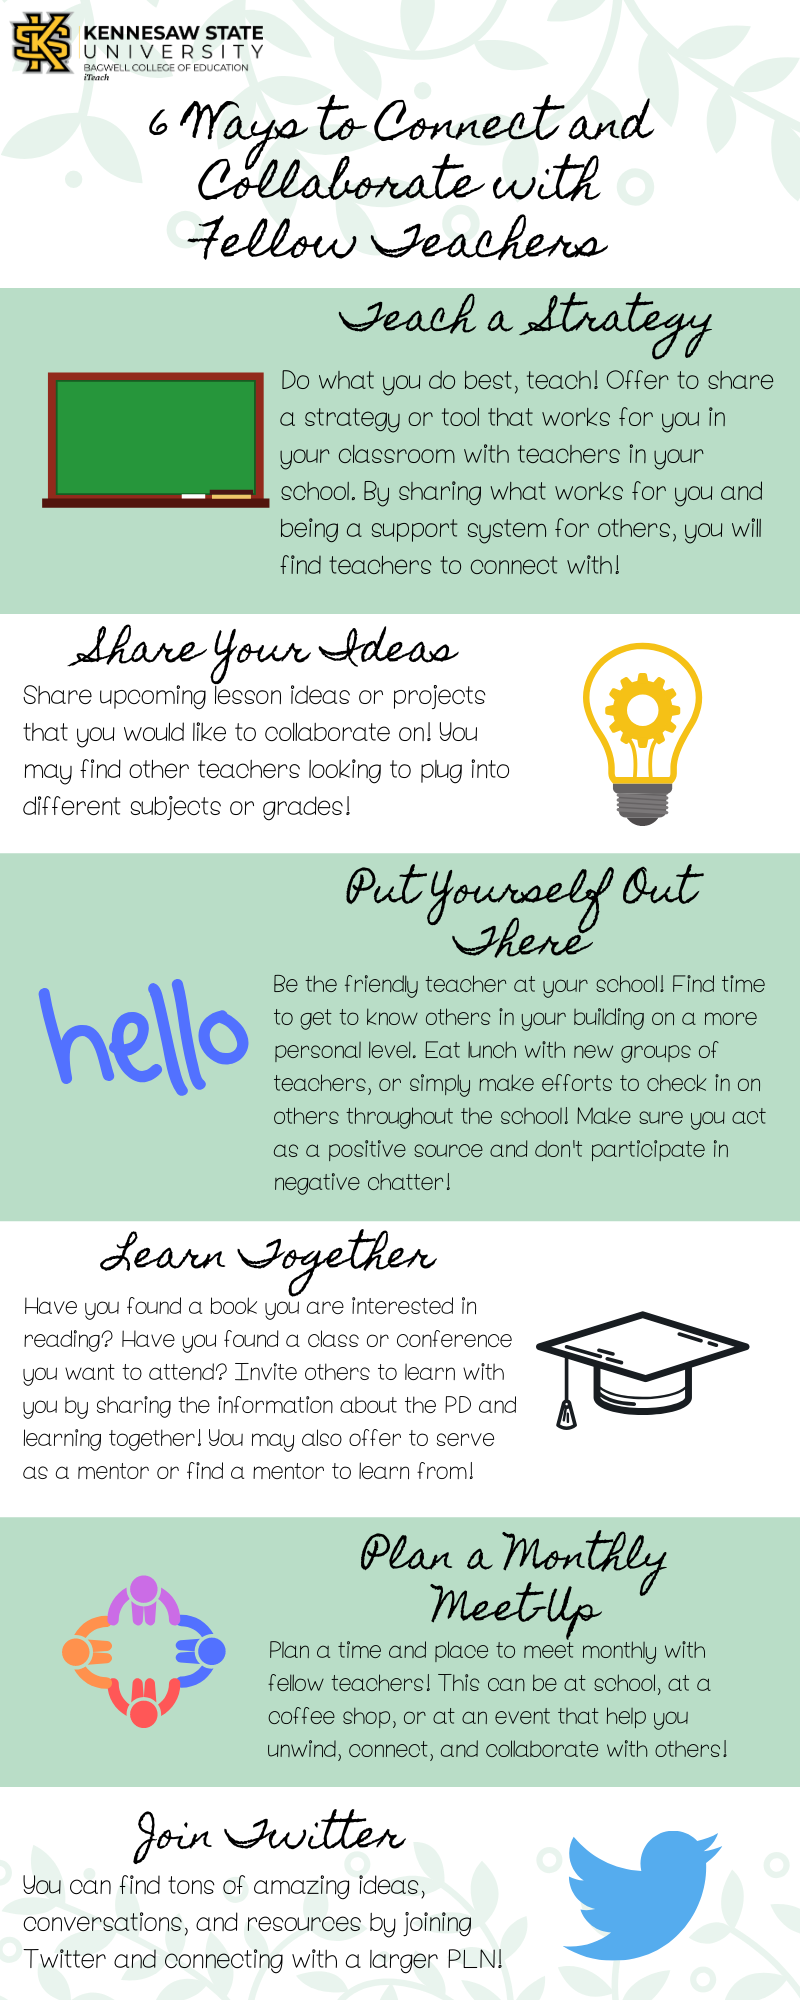 6 Ways to Connect and Collaborate.png